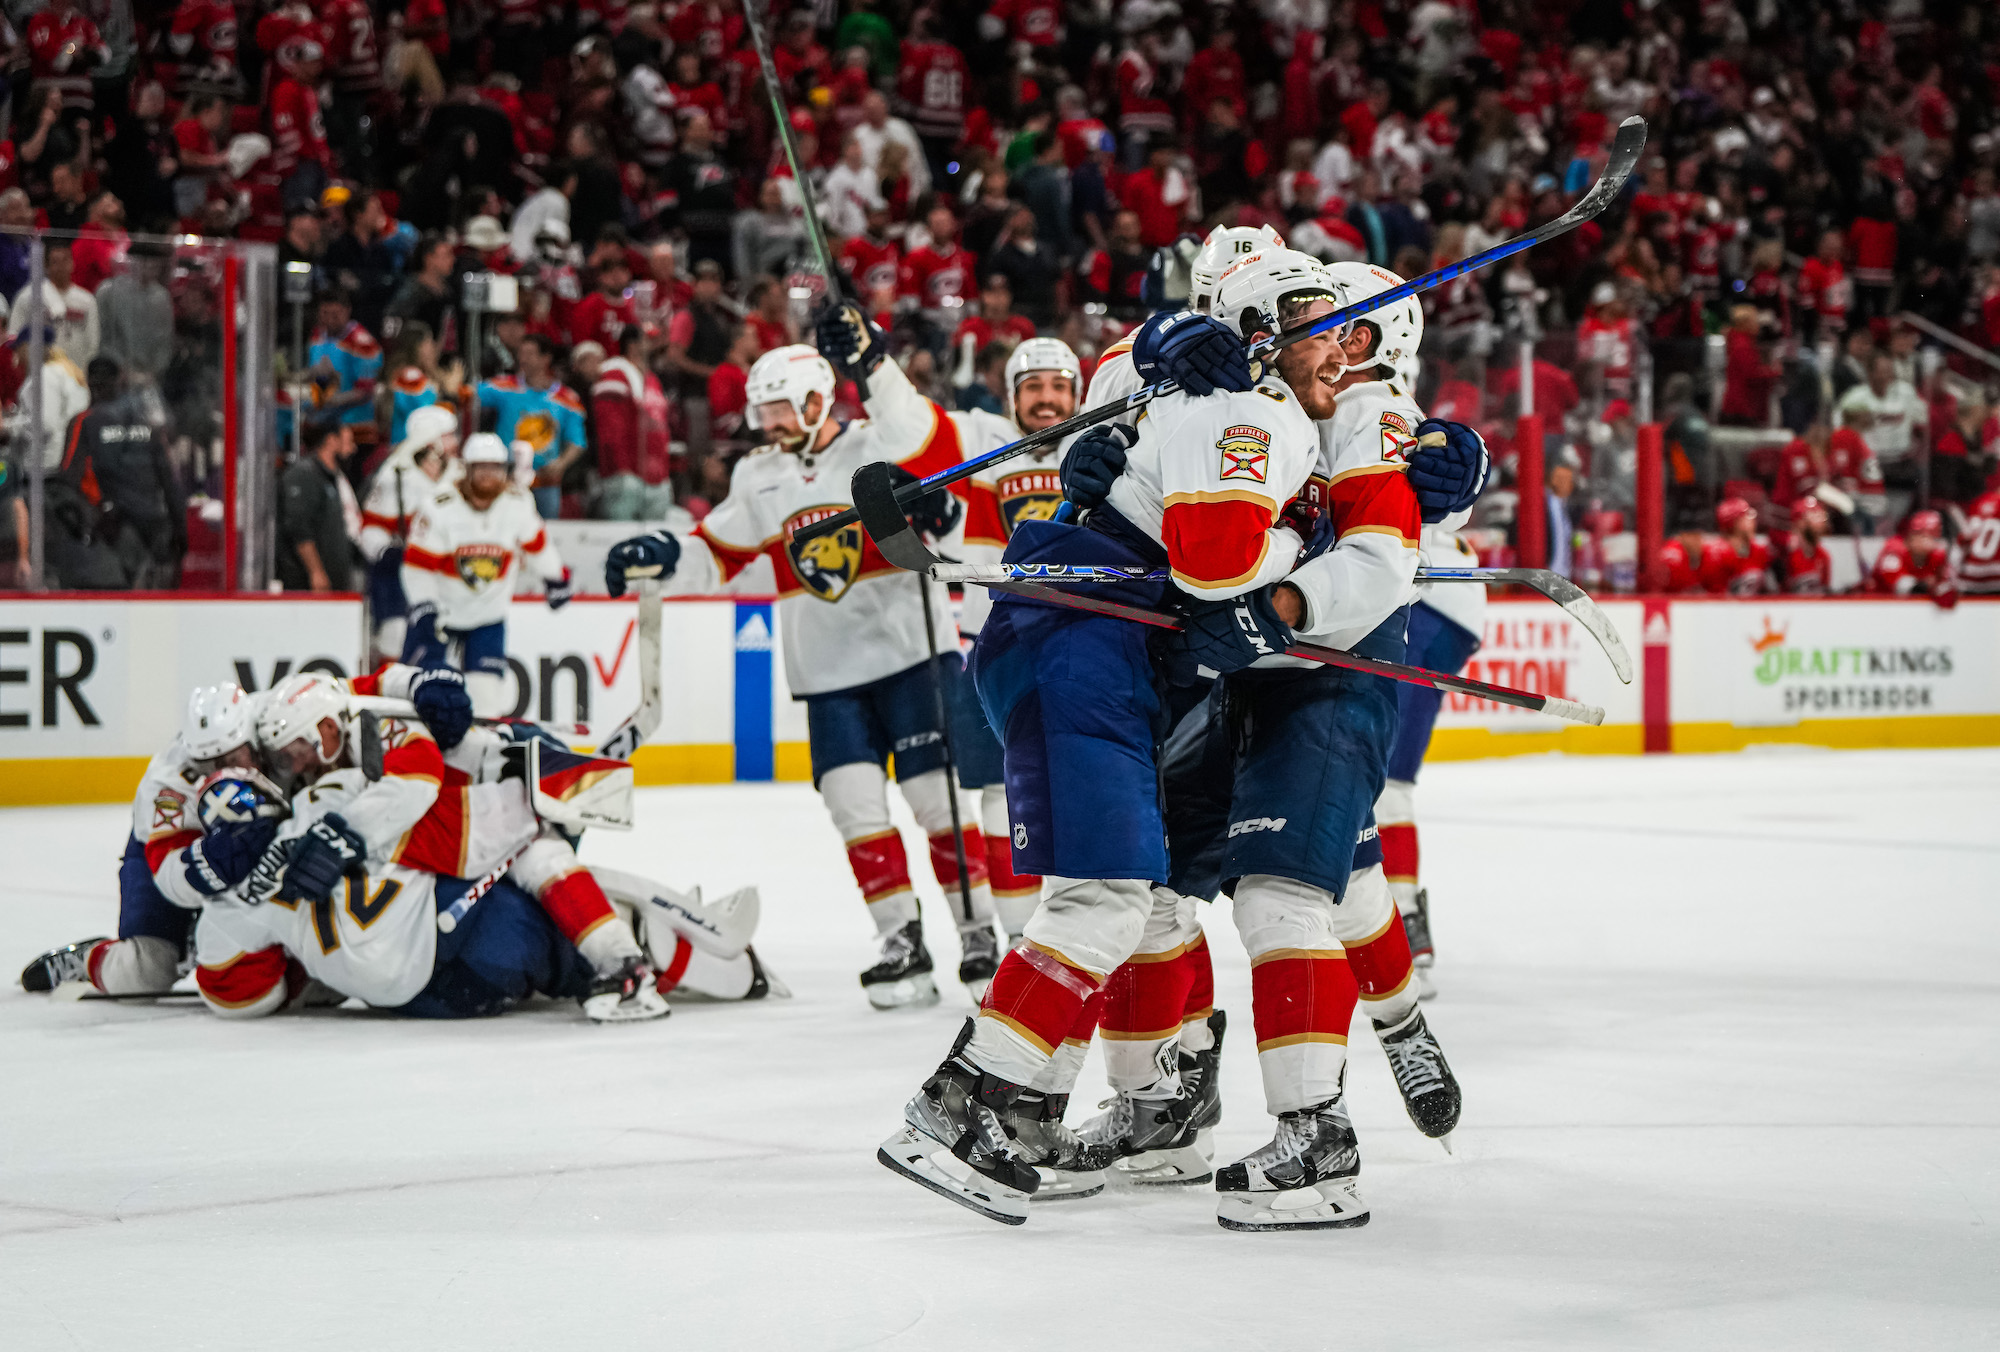 RALEIGH, NORTH CAROLINA - MAY 18: Matthew Tkachuk #19 of the Florida Panthers celebrates with teammates after scoring the game-winning goal during the fourth overtime to defeat the Carolina Hurricanes in Game One of the Eastern Conference Final of the 2023 Stanley Cup Playoffs at PNC Arena on May 18, 2023 in Raleigh, North Carolina. (Photo by Josh Lavallee/NHLI via Getty Images)